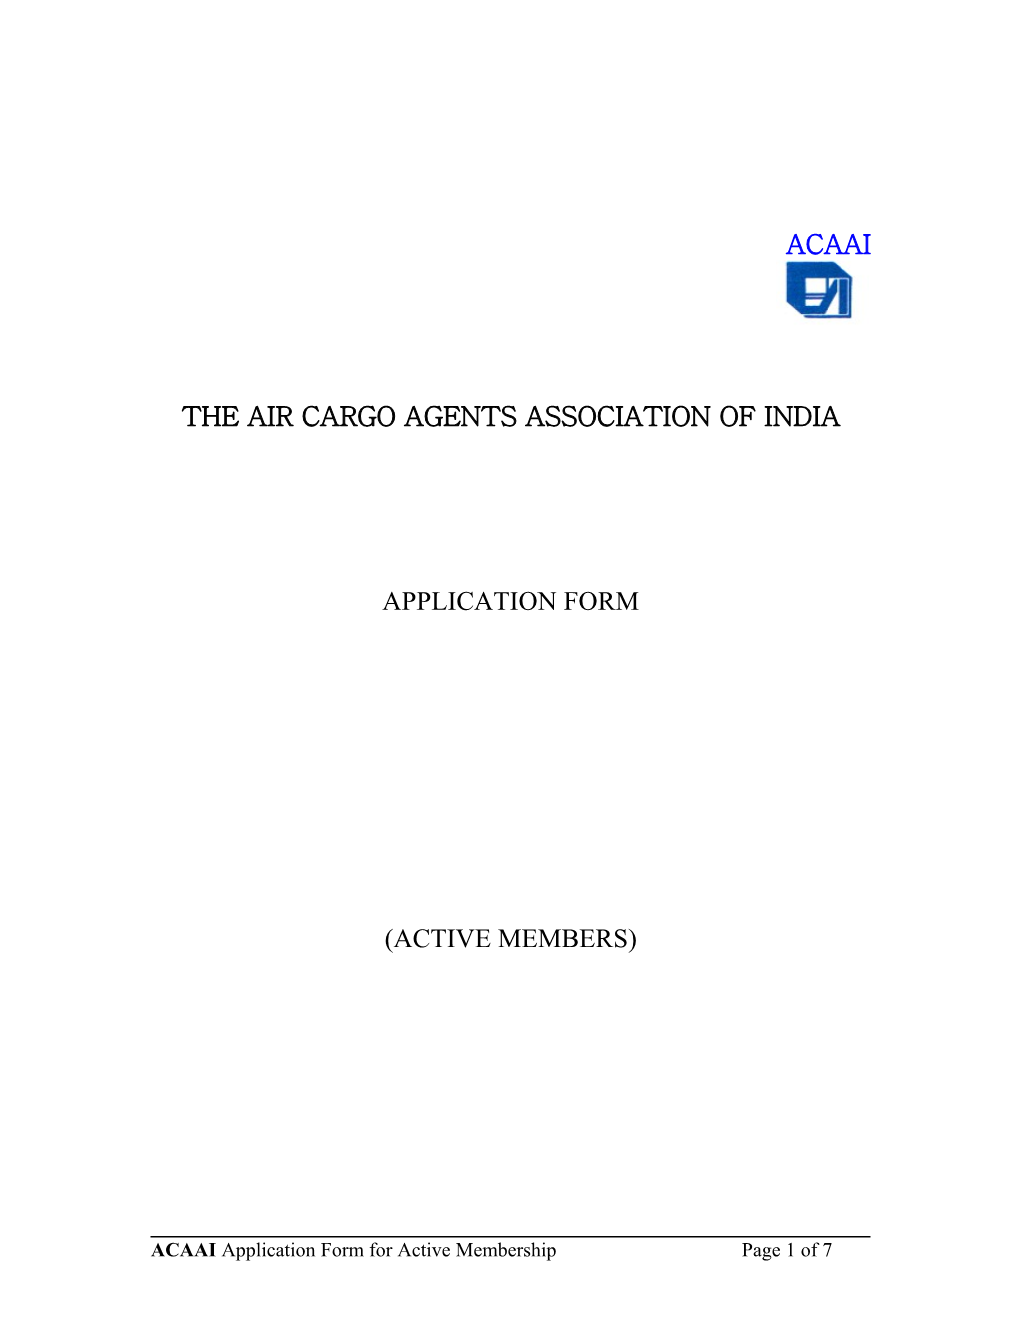 The Air Cargo Agents Association of India